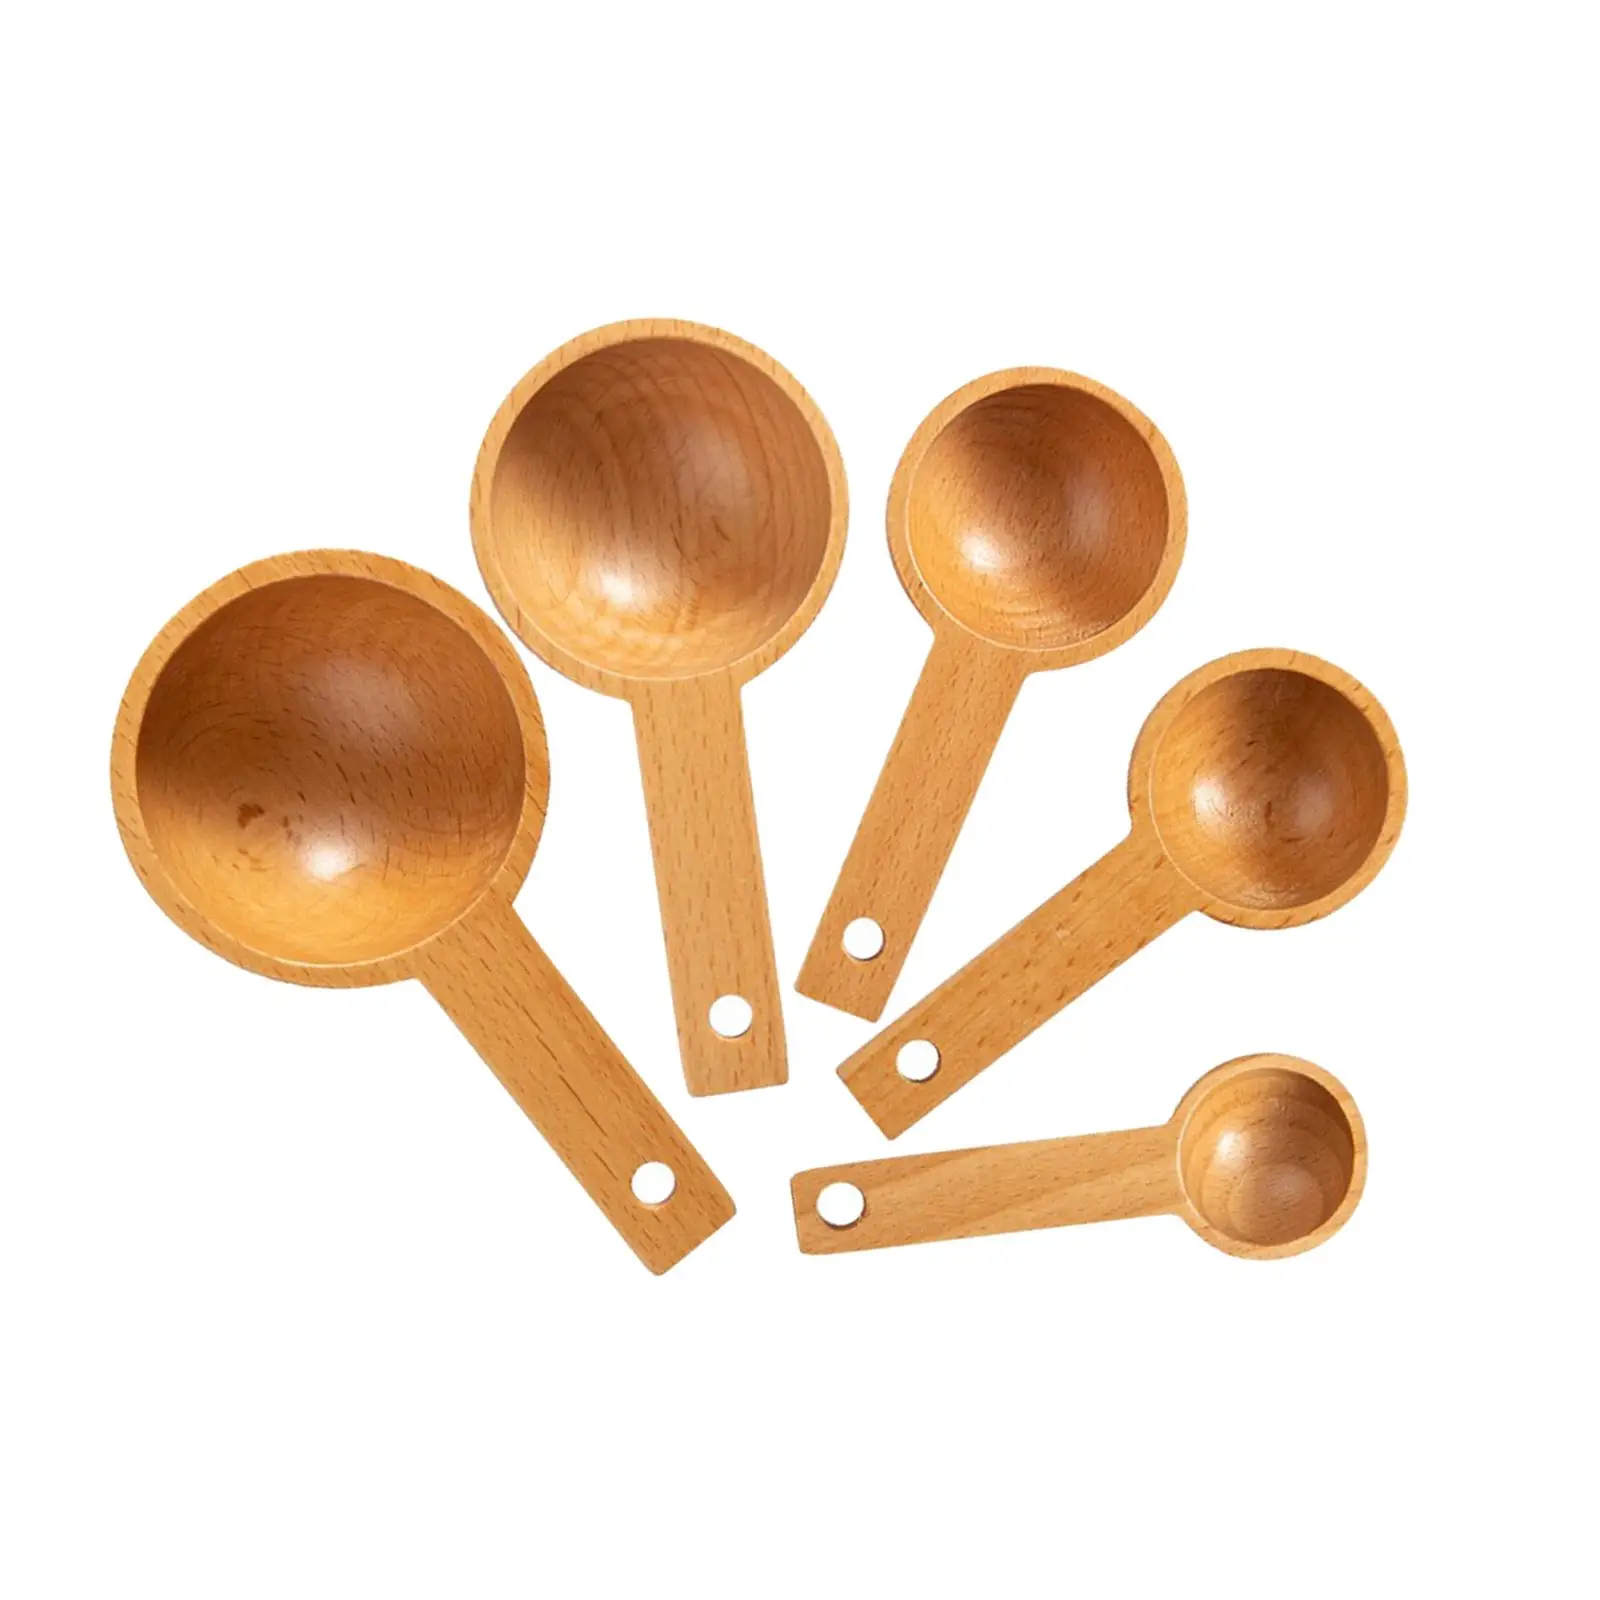 5 Sizes Wood Measuring Spoons Coffee Spoon Tablespoon for Kitchen Cooking